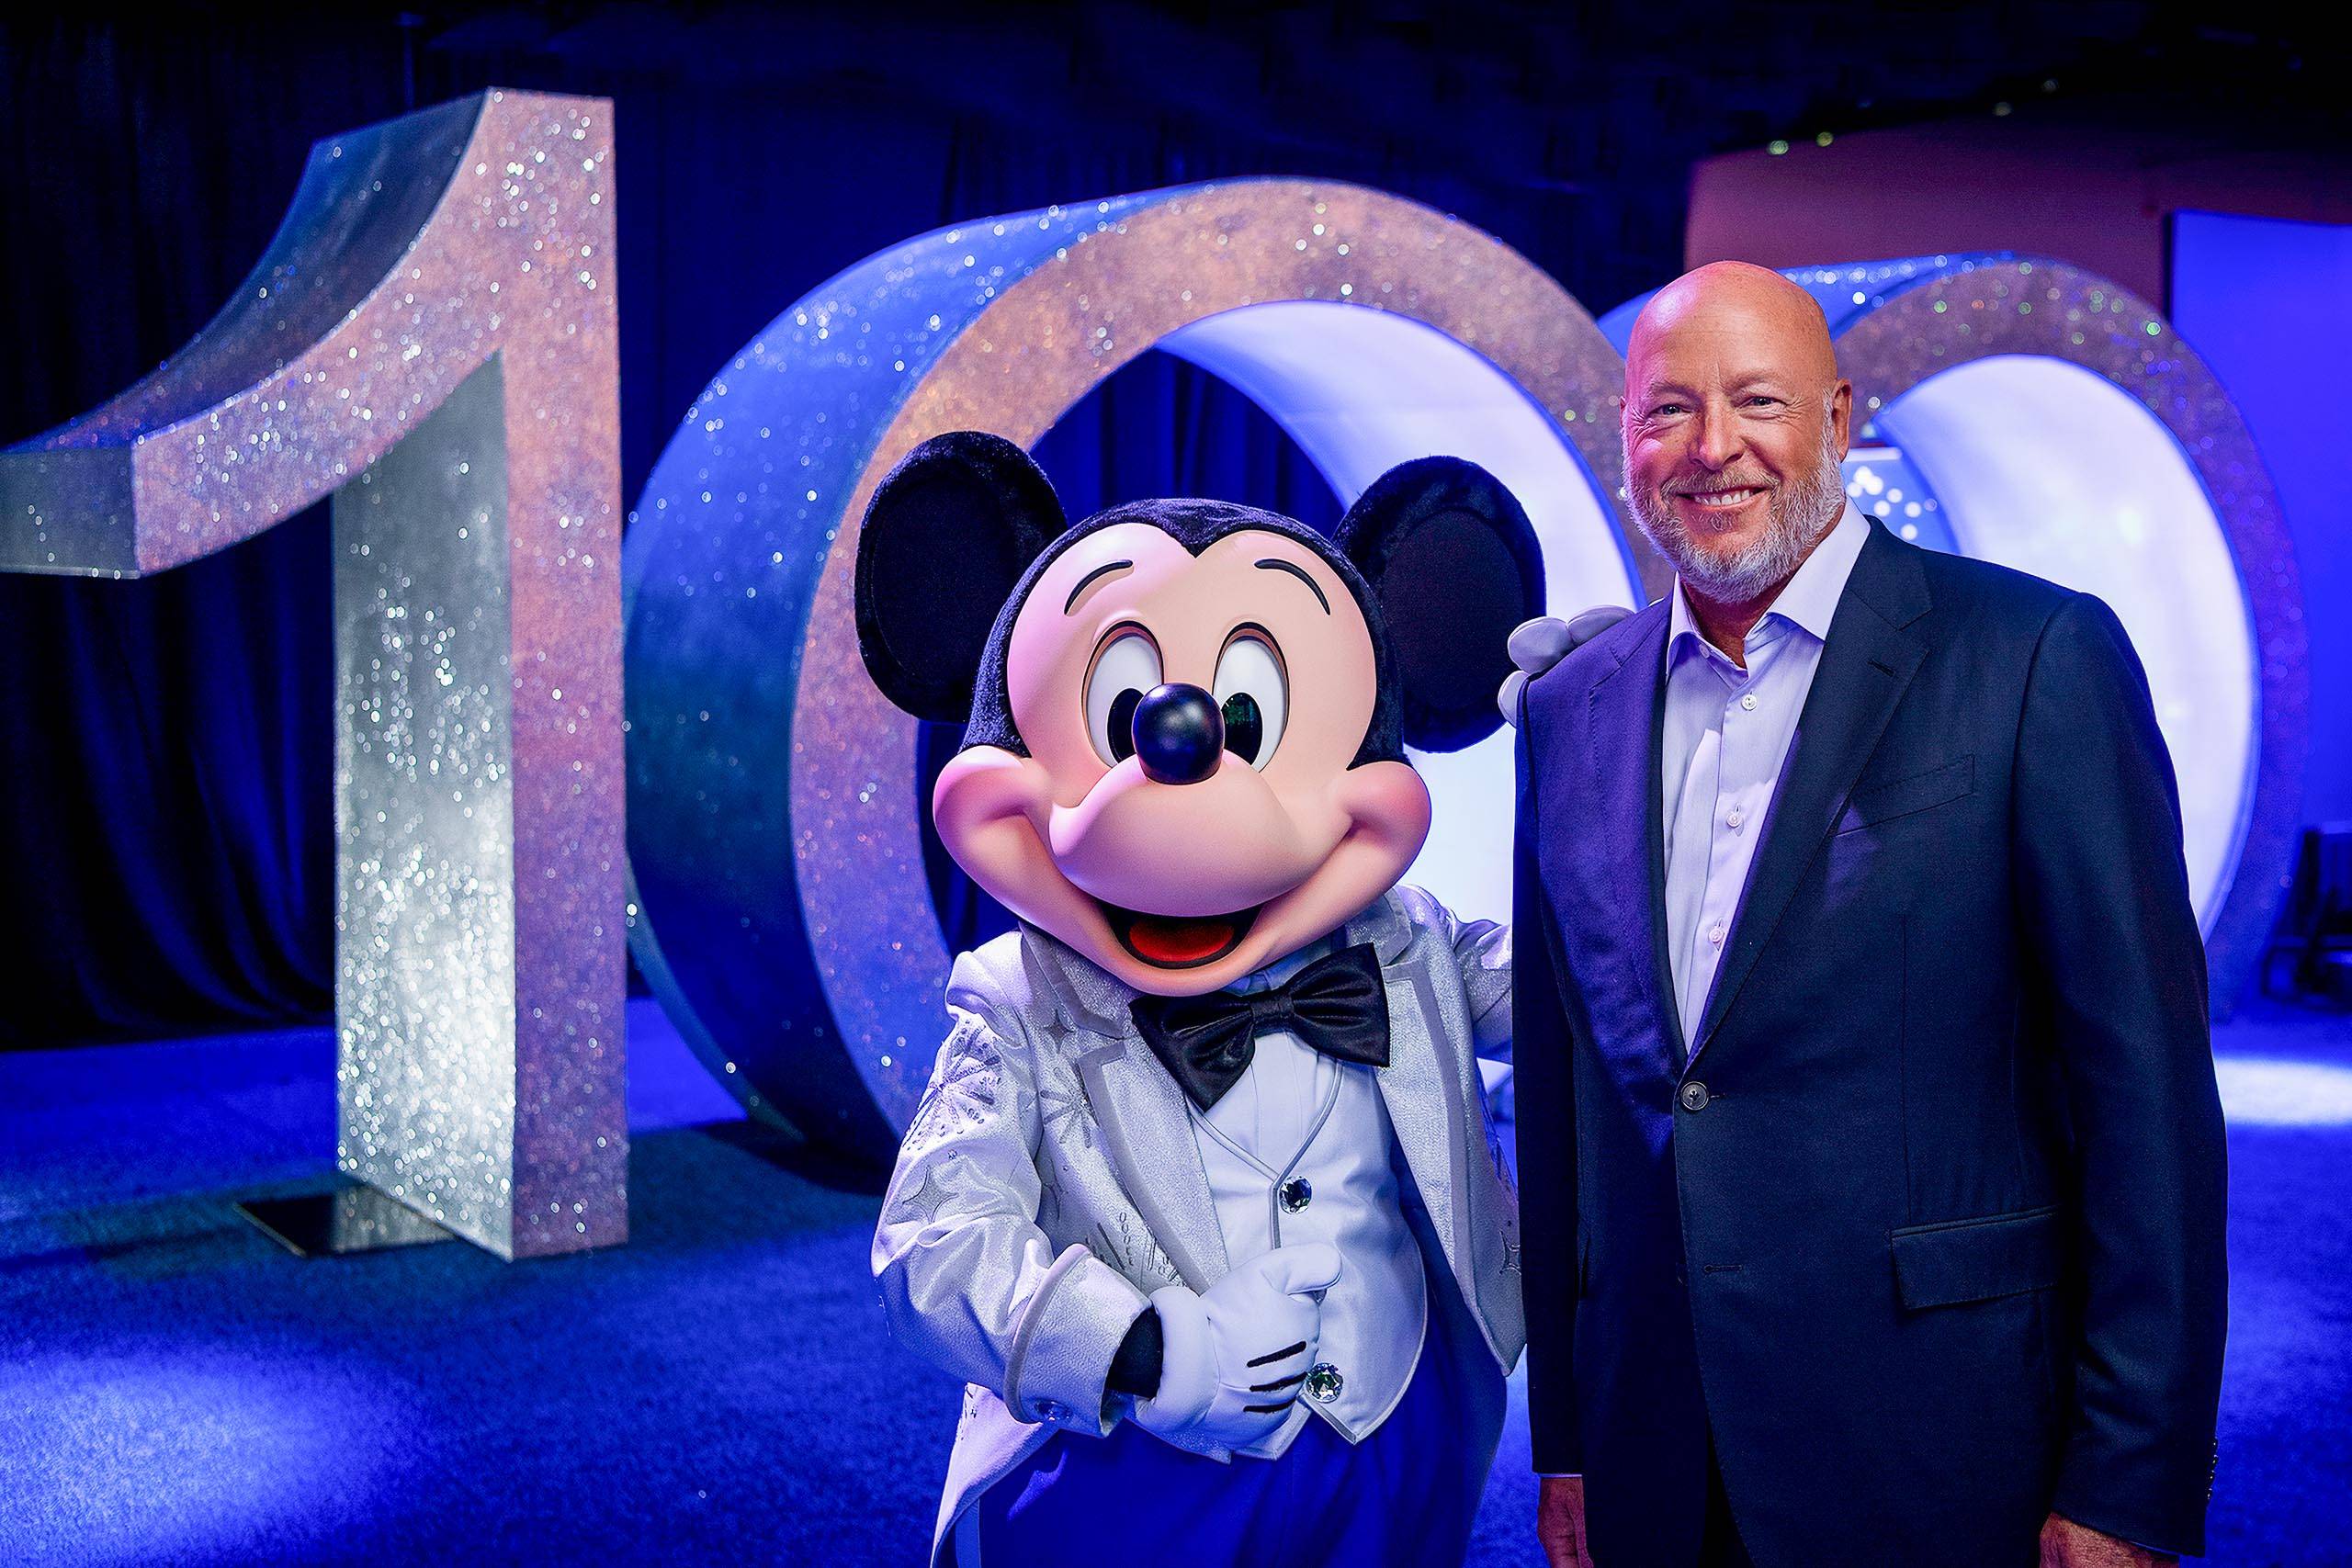 Former Disney CEO Bob Chapek repeatedly raised prices at the theme parks pricing many out of a Disney vacation